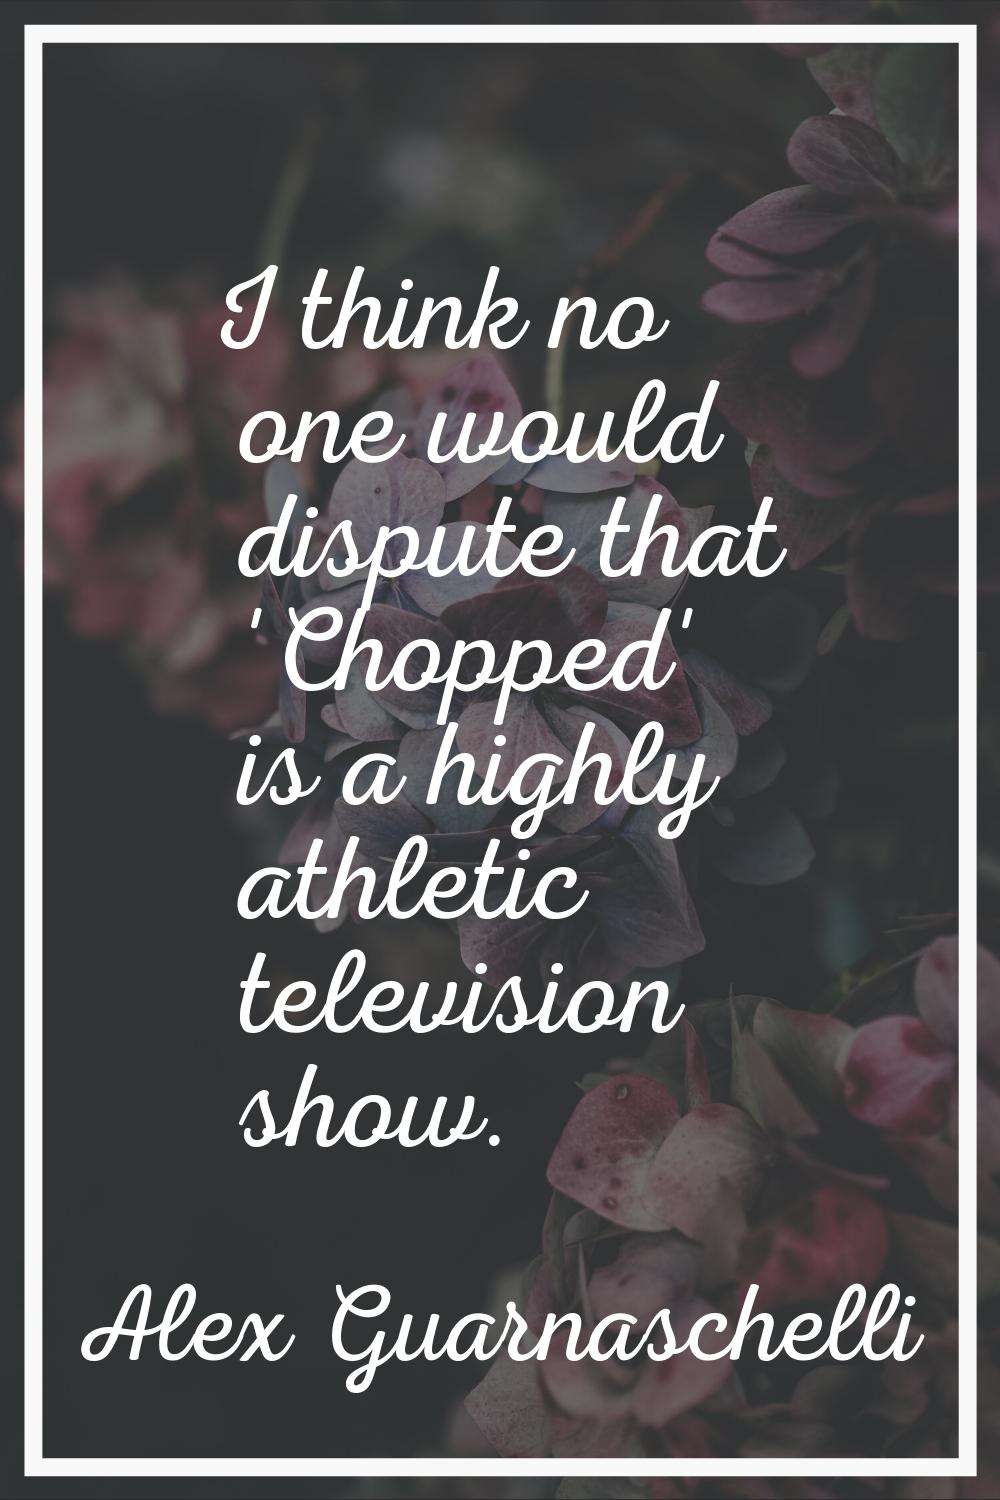 I think no one would dispute that 'Chopped' is a highly athletic television show.